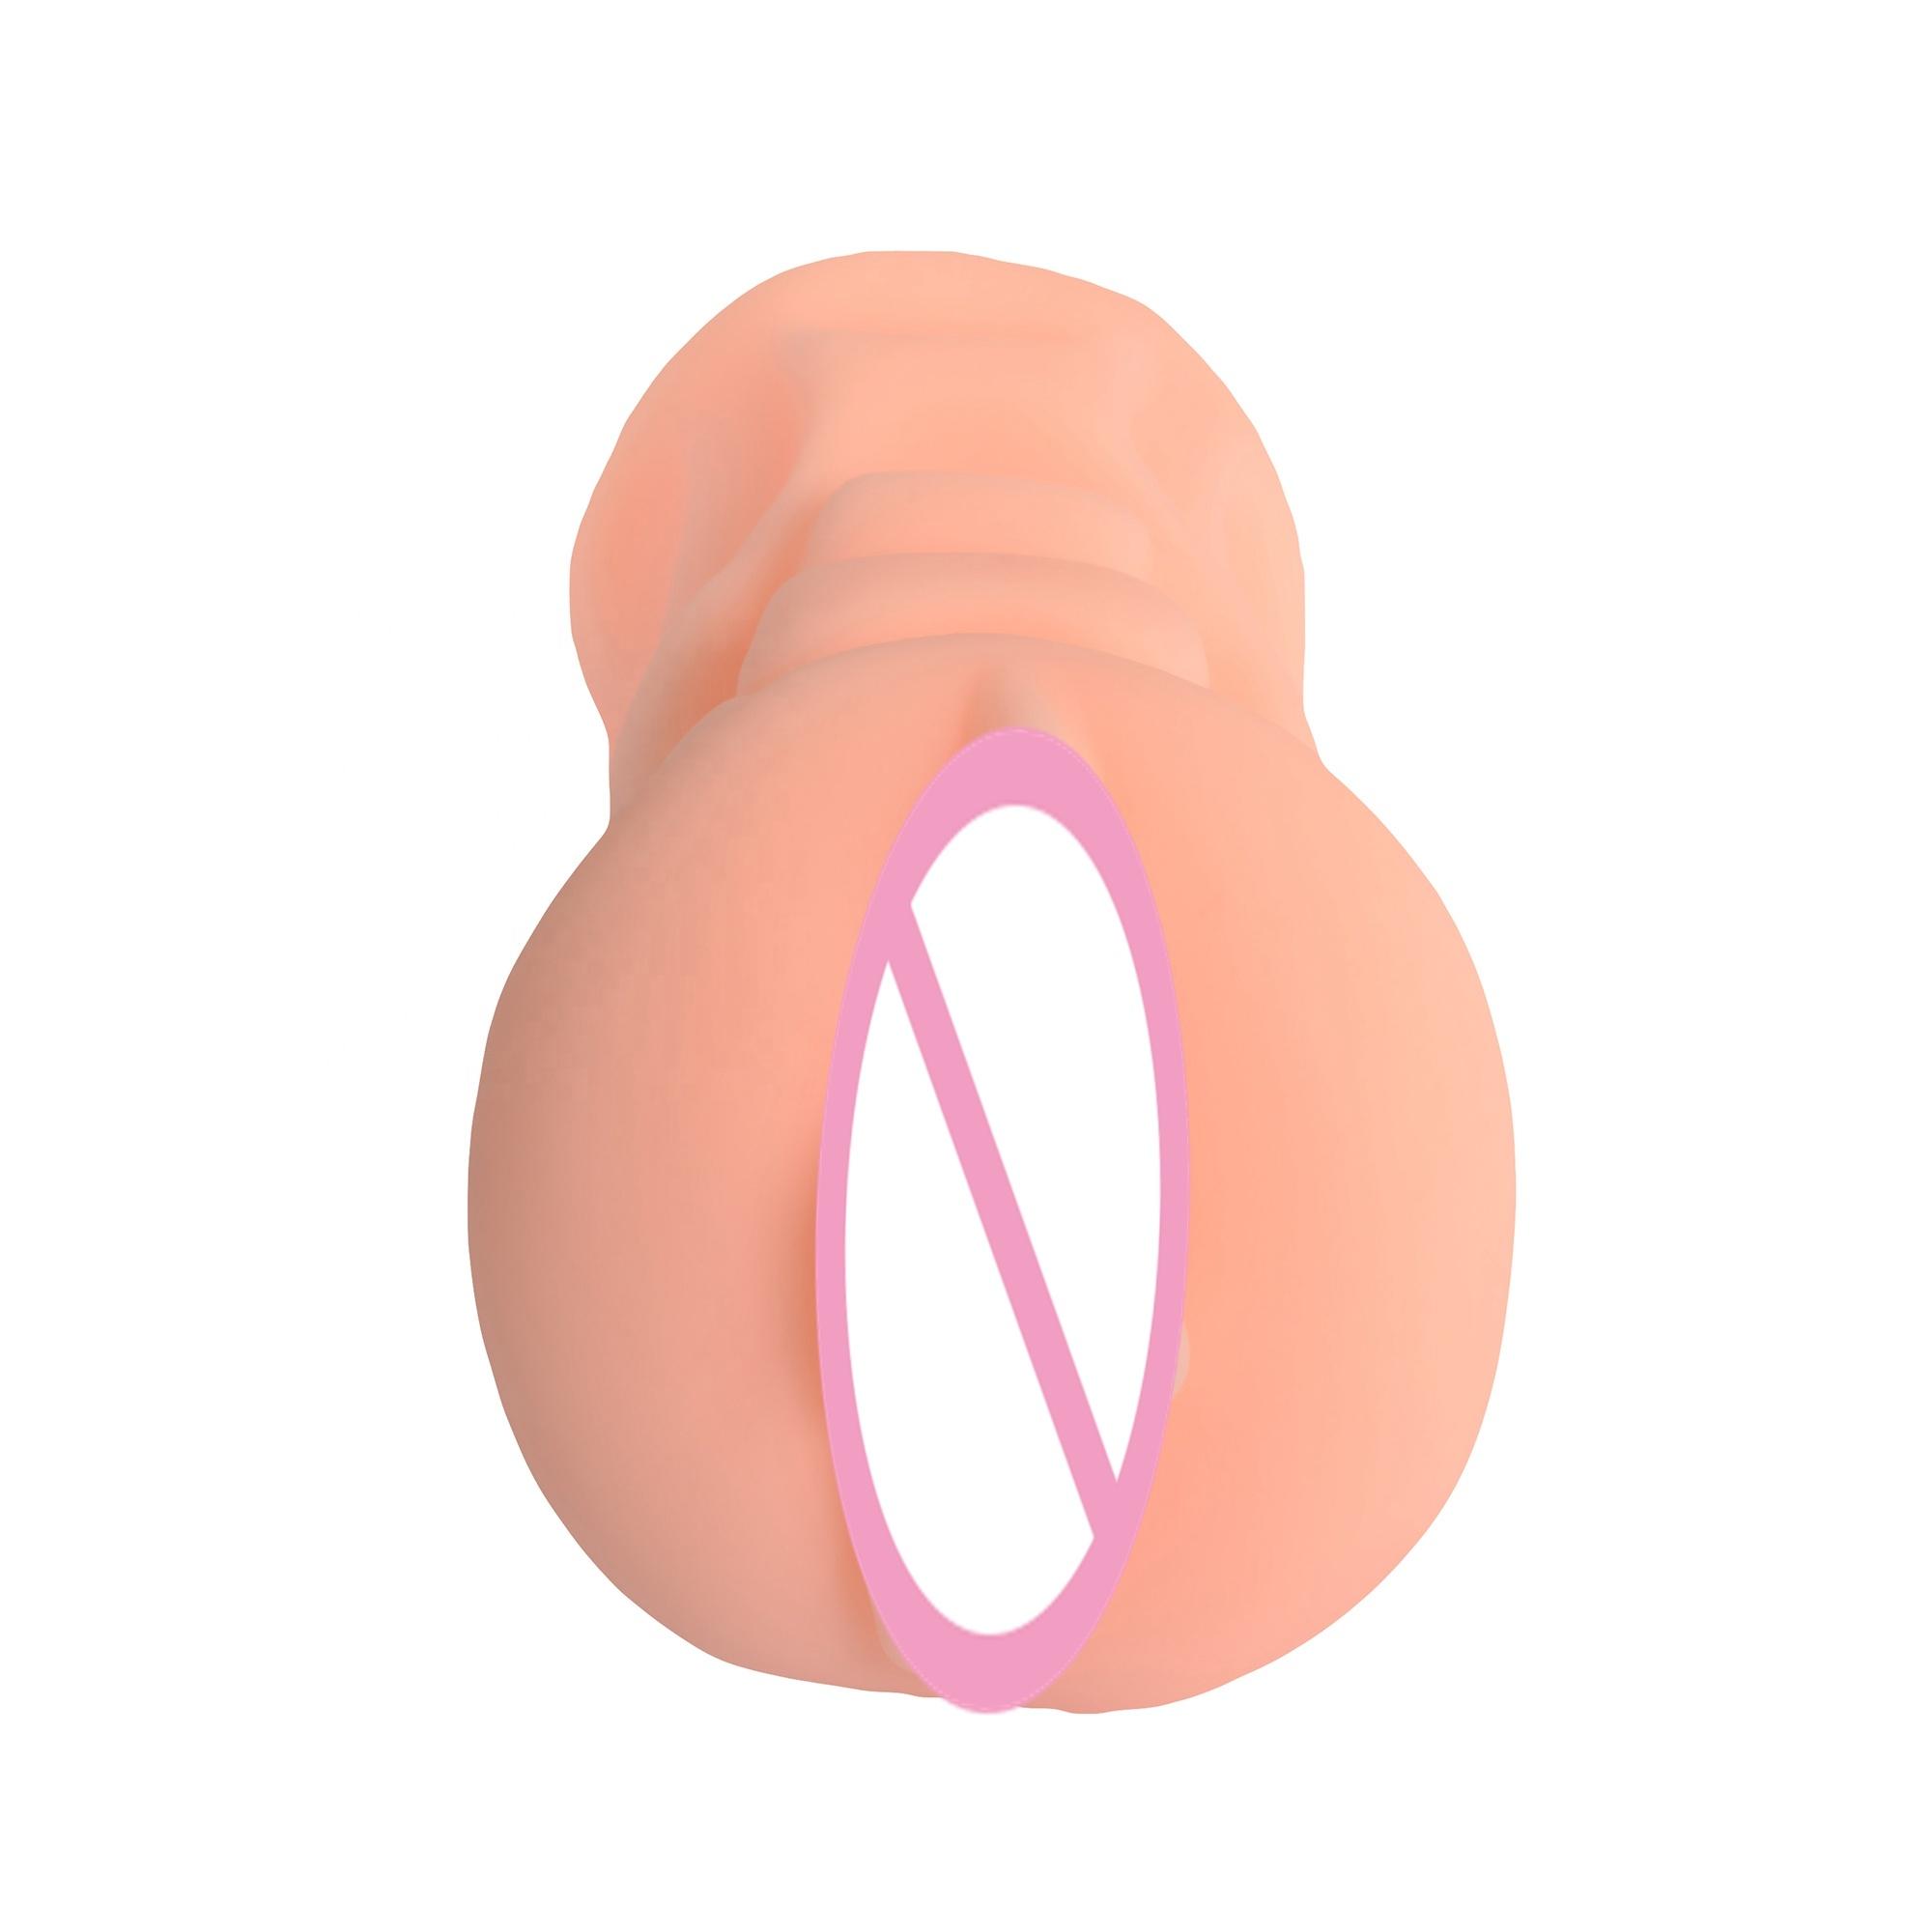  Soft Medical Dual Layer Mini Vaginal Masturbation Stroker Realistic 3d Portable Sexy Big Ass Sex Toy Device For Men Male